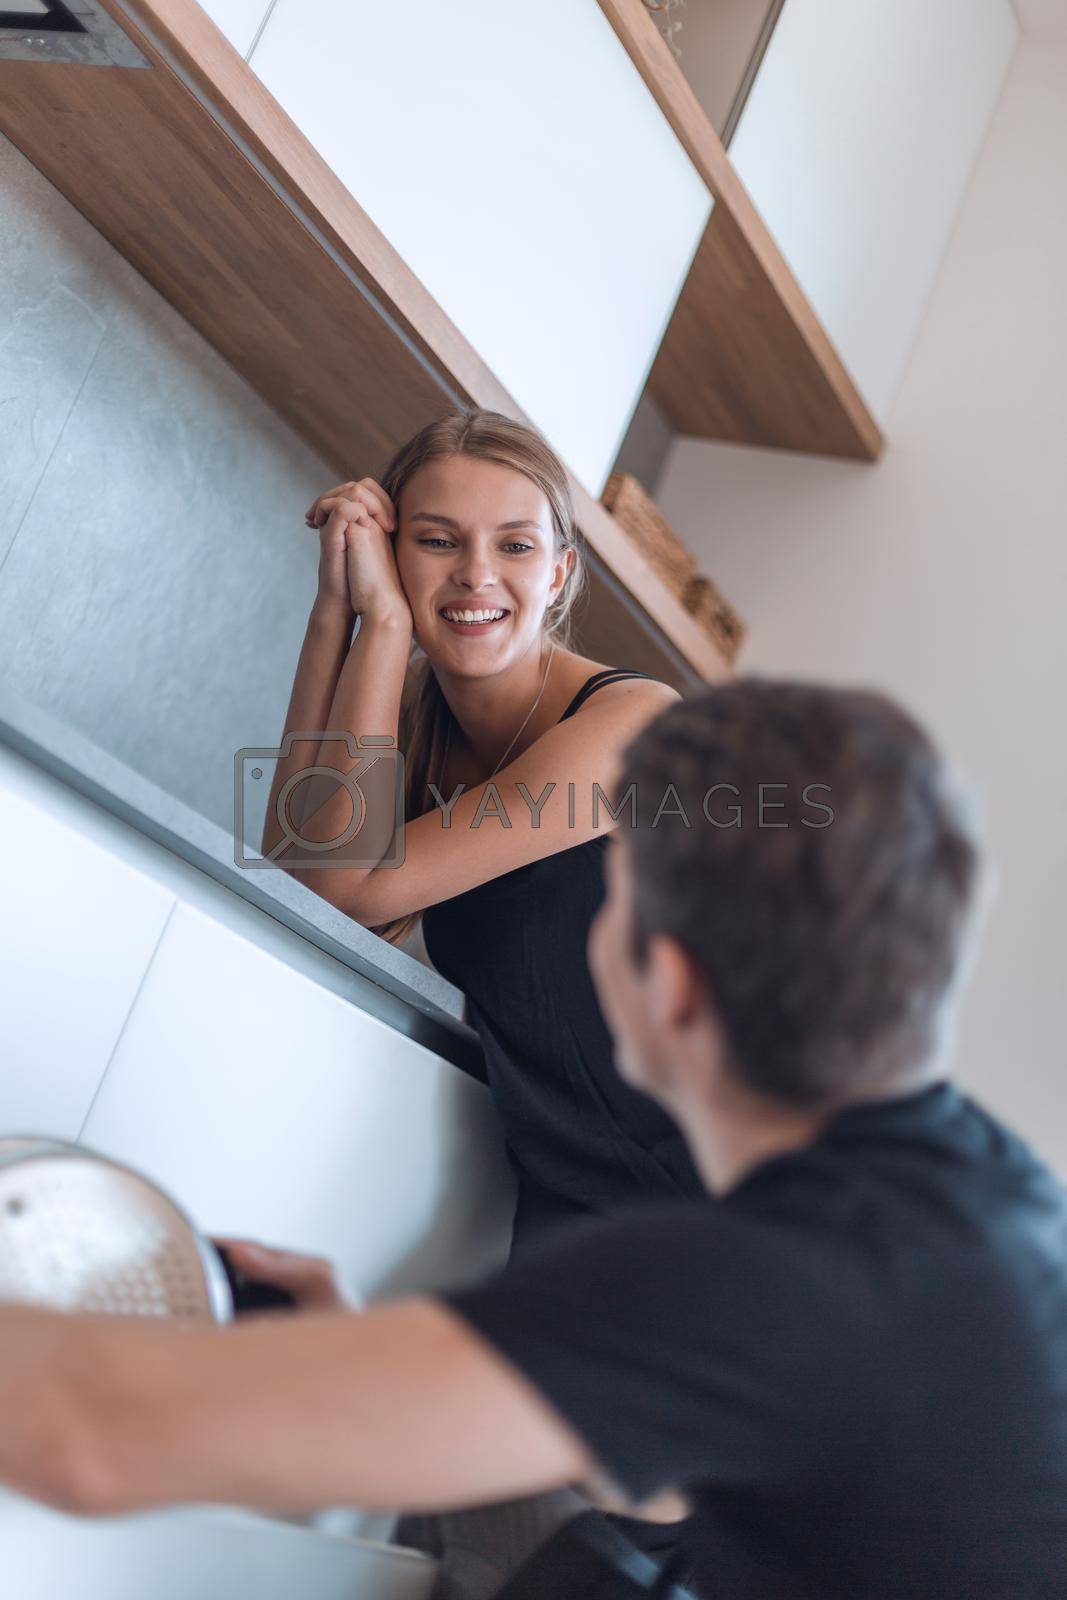 Royalty free image of happy husband gets the dishes out of the dishwasher by asdf